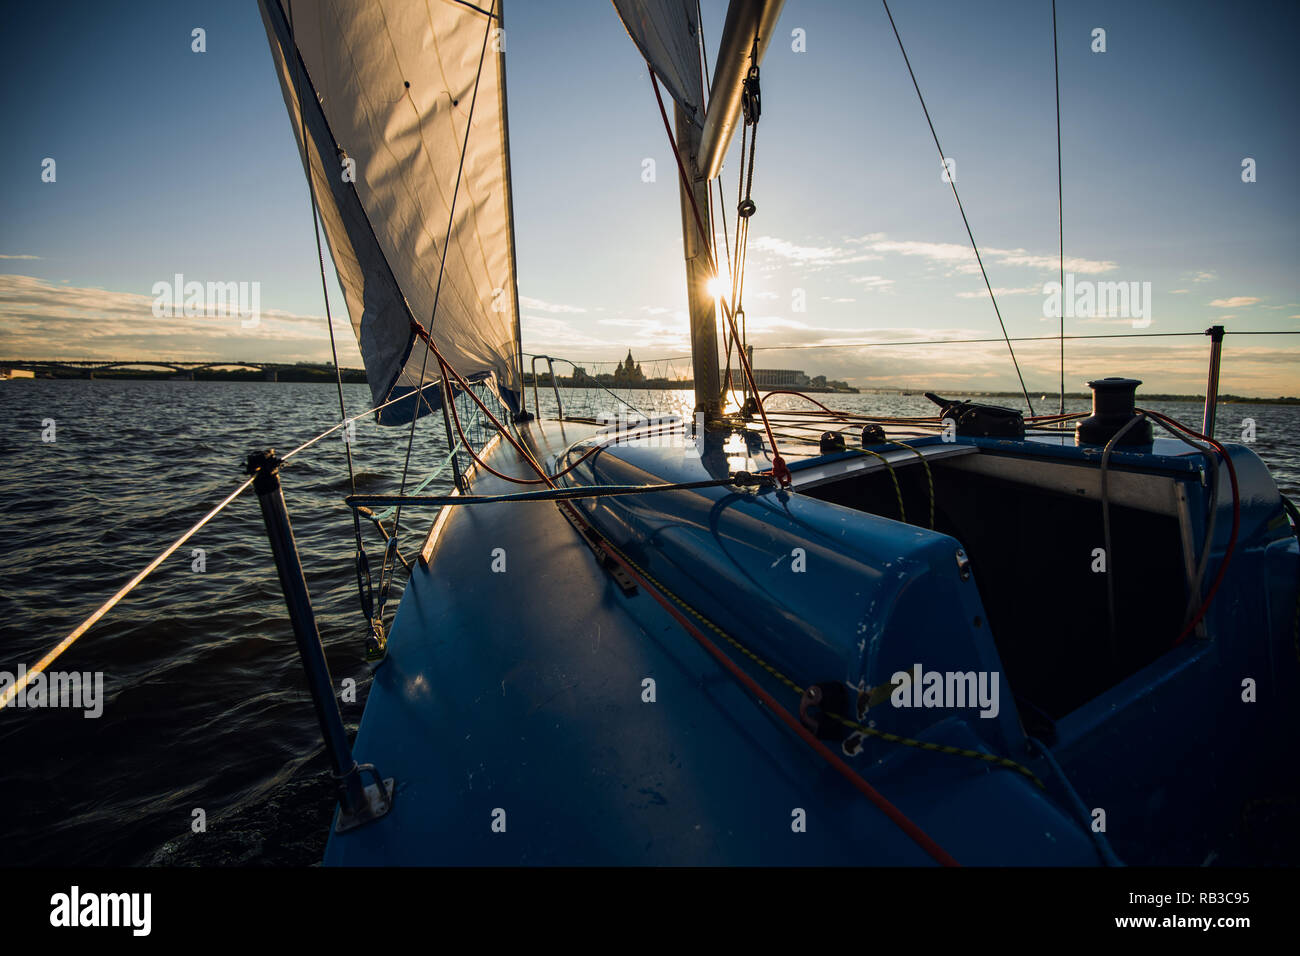 Sunset at the Sailboat deck while cruising sailing at opened sea or river. Yacht with full sails up at the end of windy day. Sailing theme - background. Yachting background design. Stock Photo